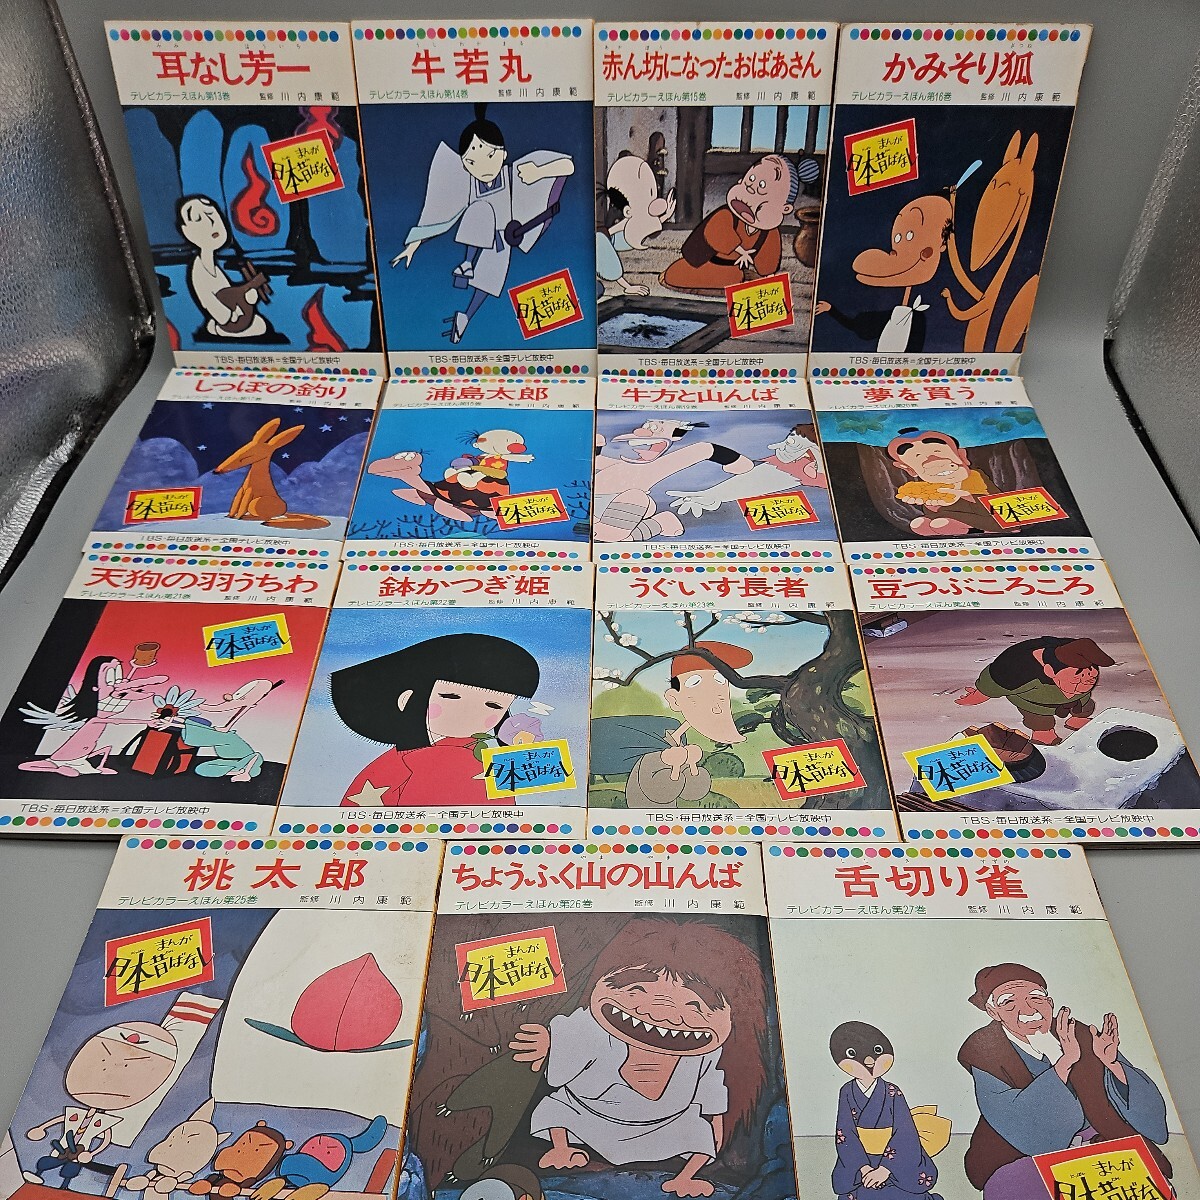  tv color ...... Japan former times . none all 60 volume #24-516-4